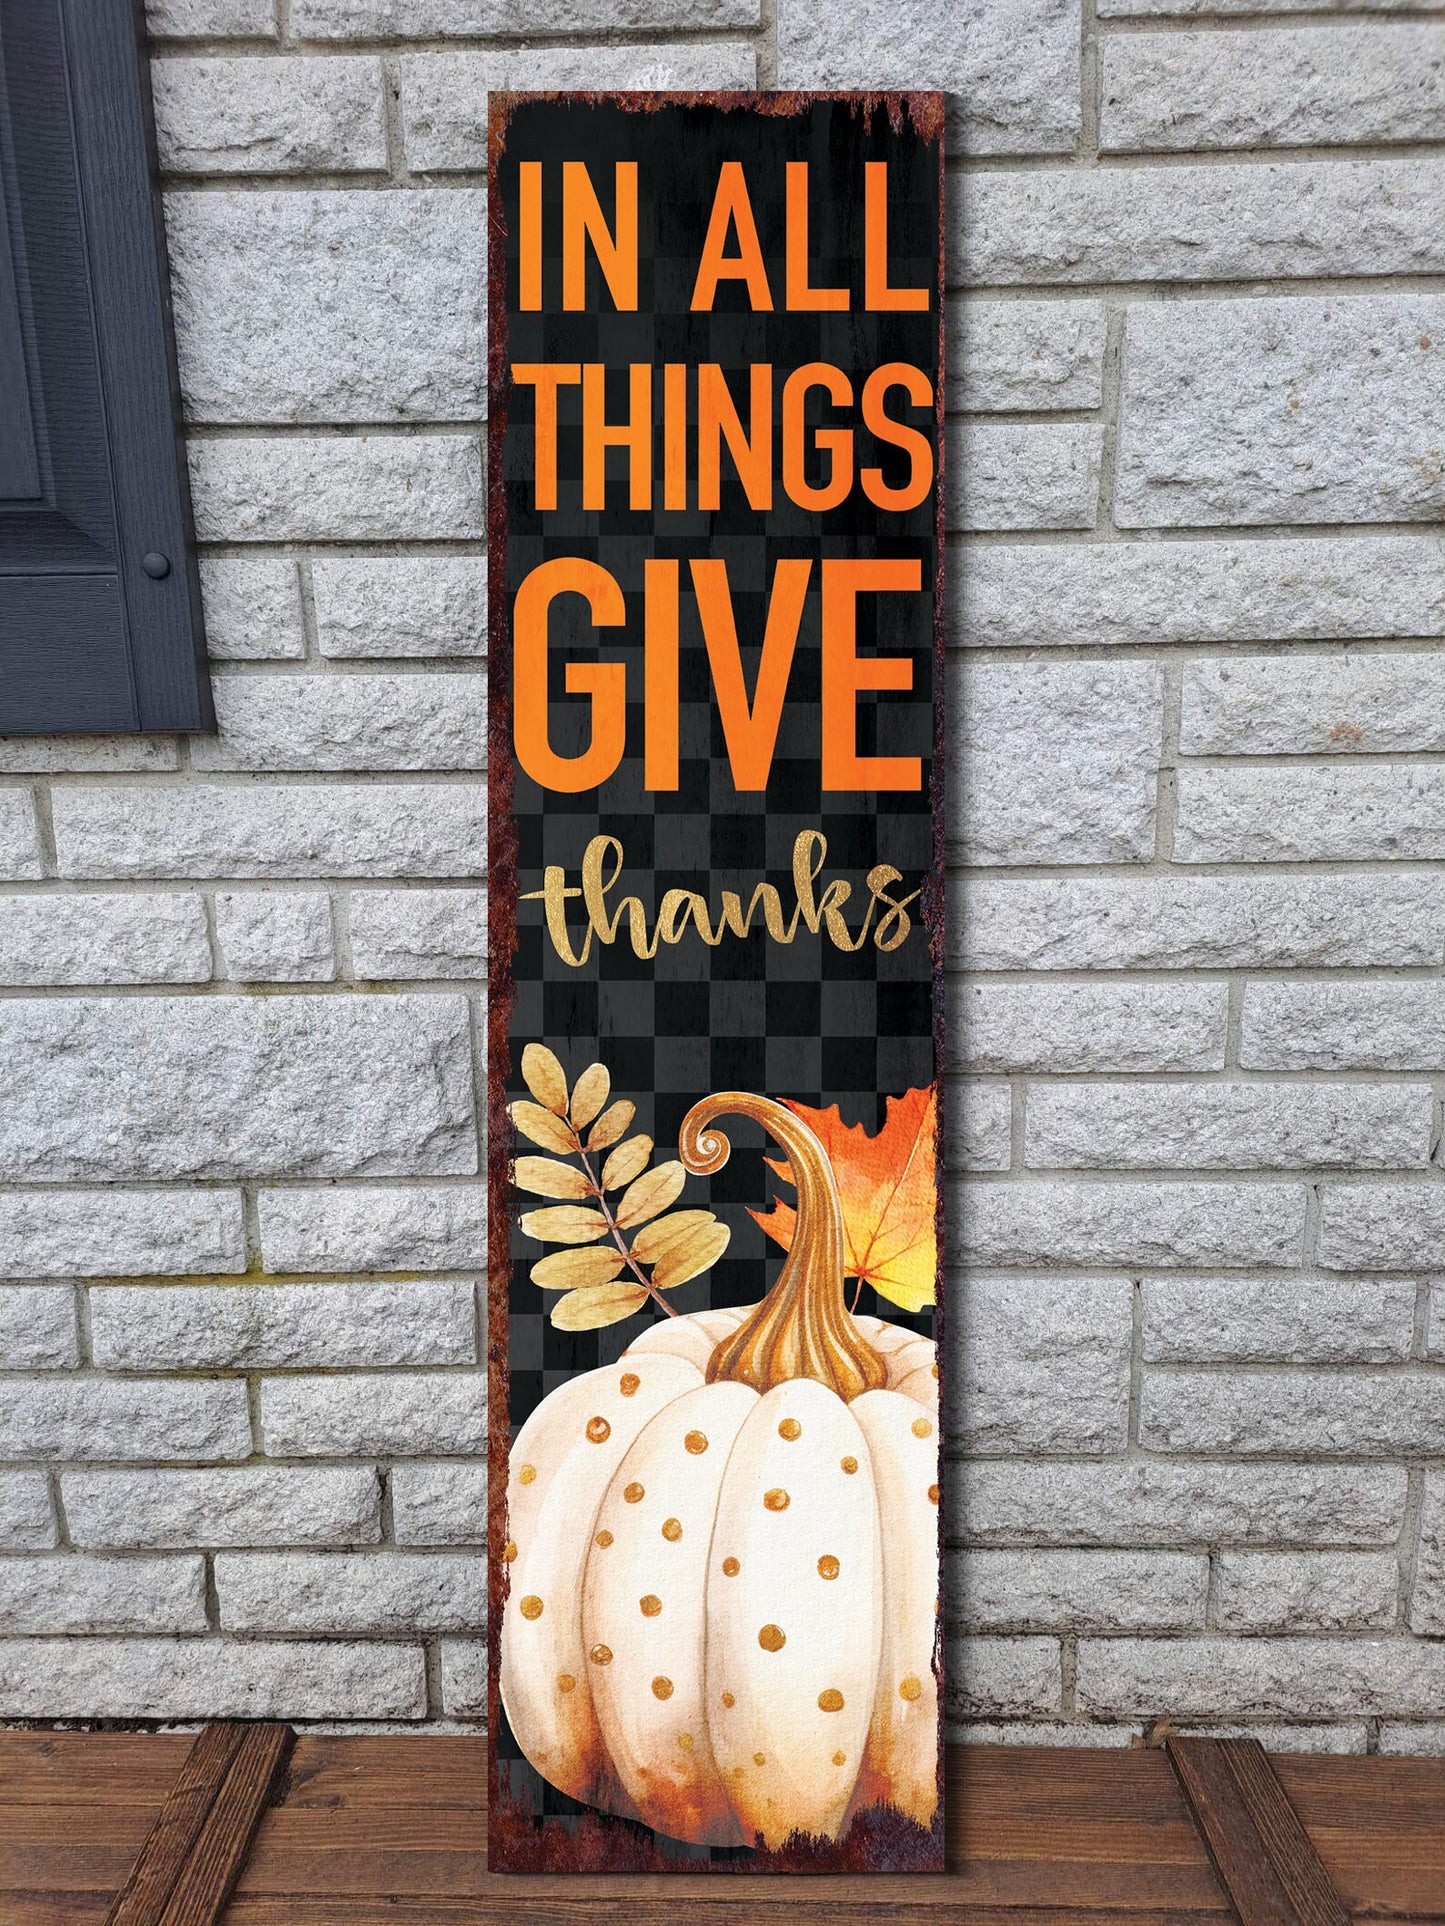 36in 'In All Things Give Thanks' Fall Porch Sign - Front Porch Vintage Autumn Decoration, Farmhouse Entryway Porch Decor